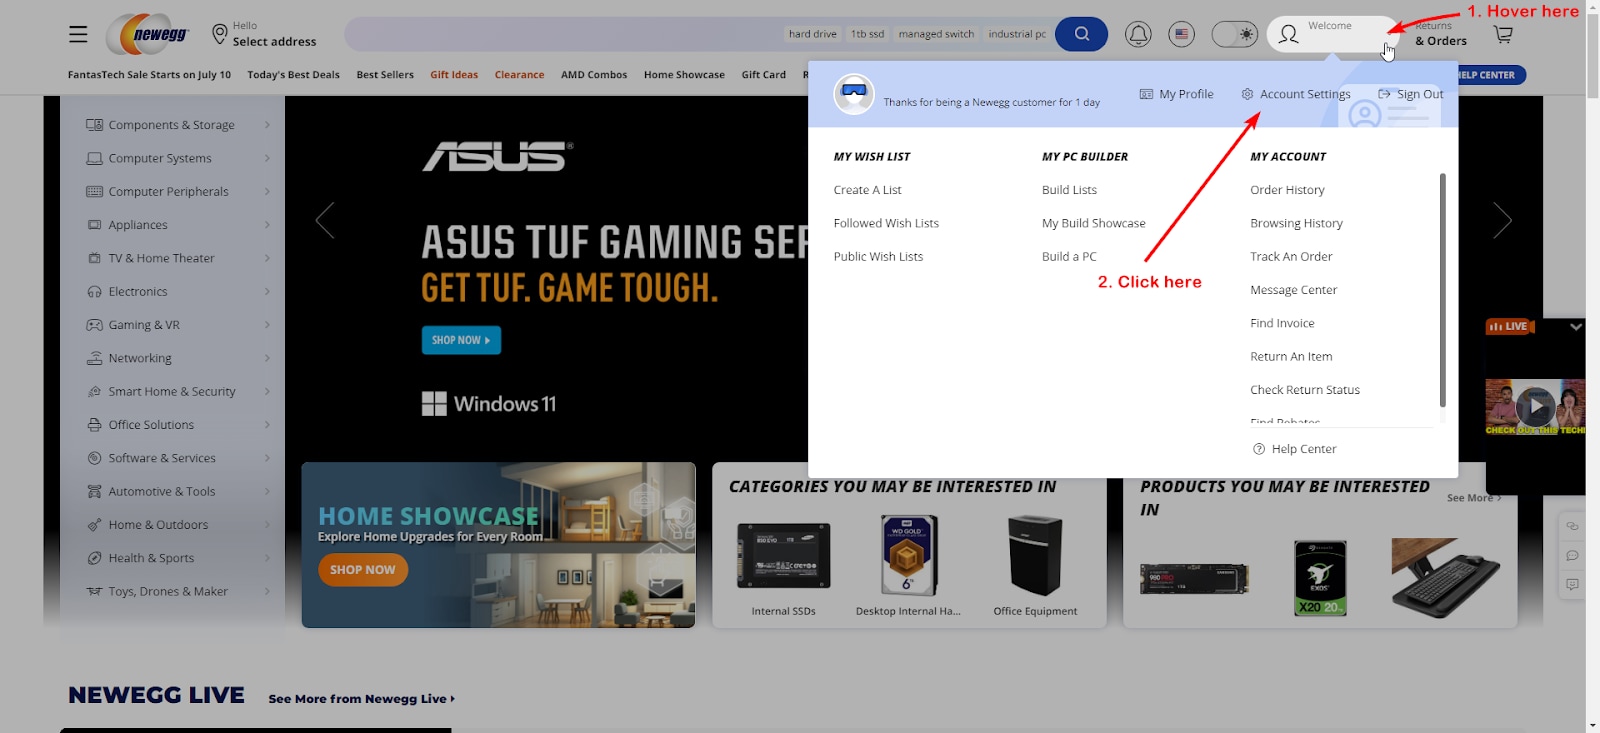 Newegg Member Home Page